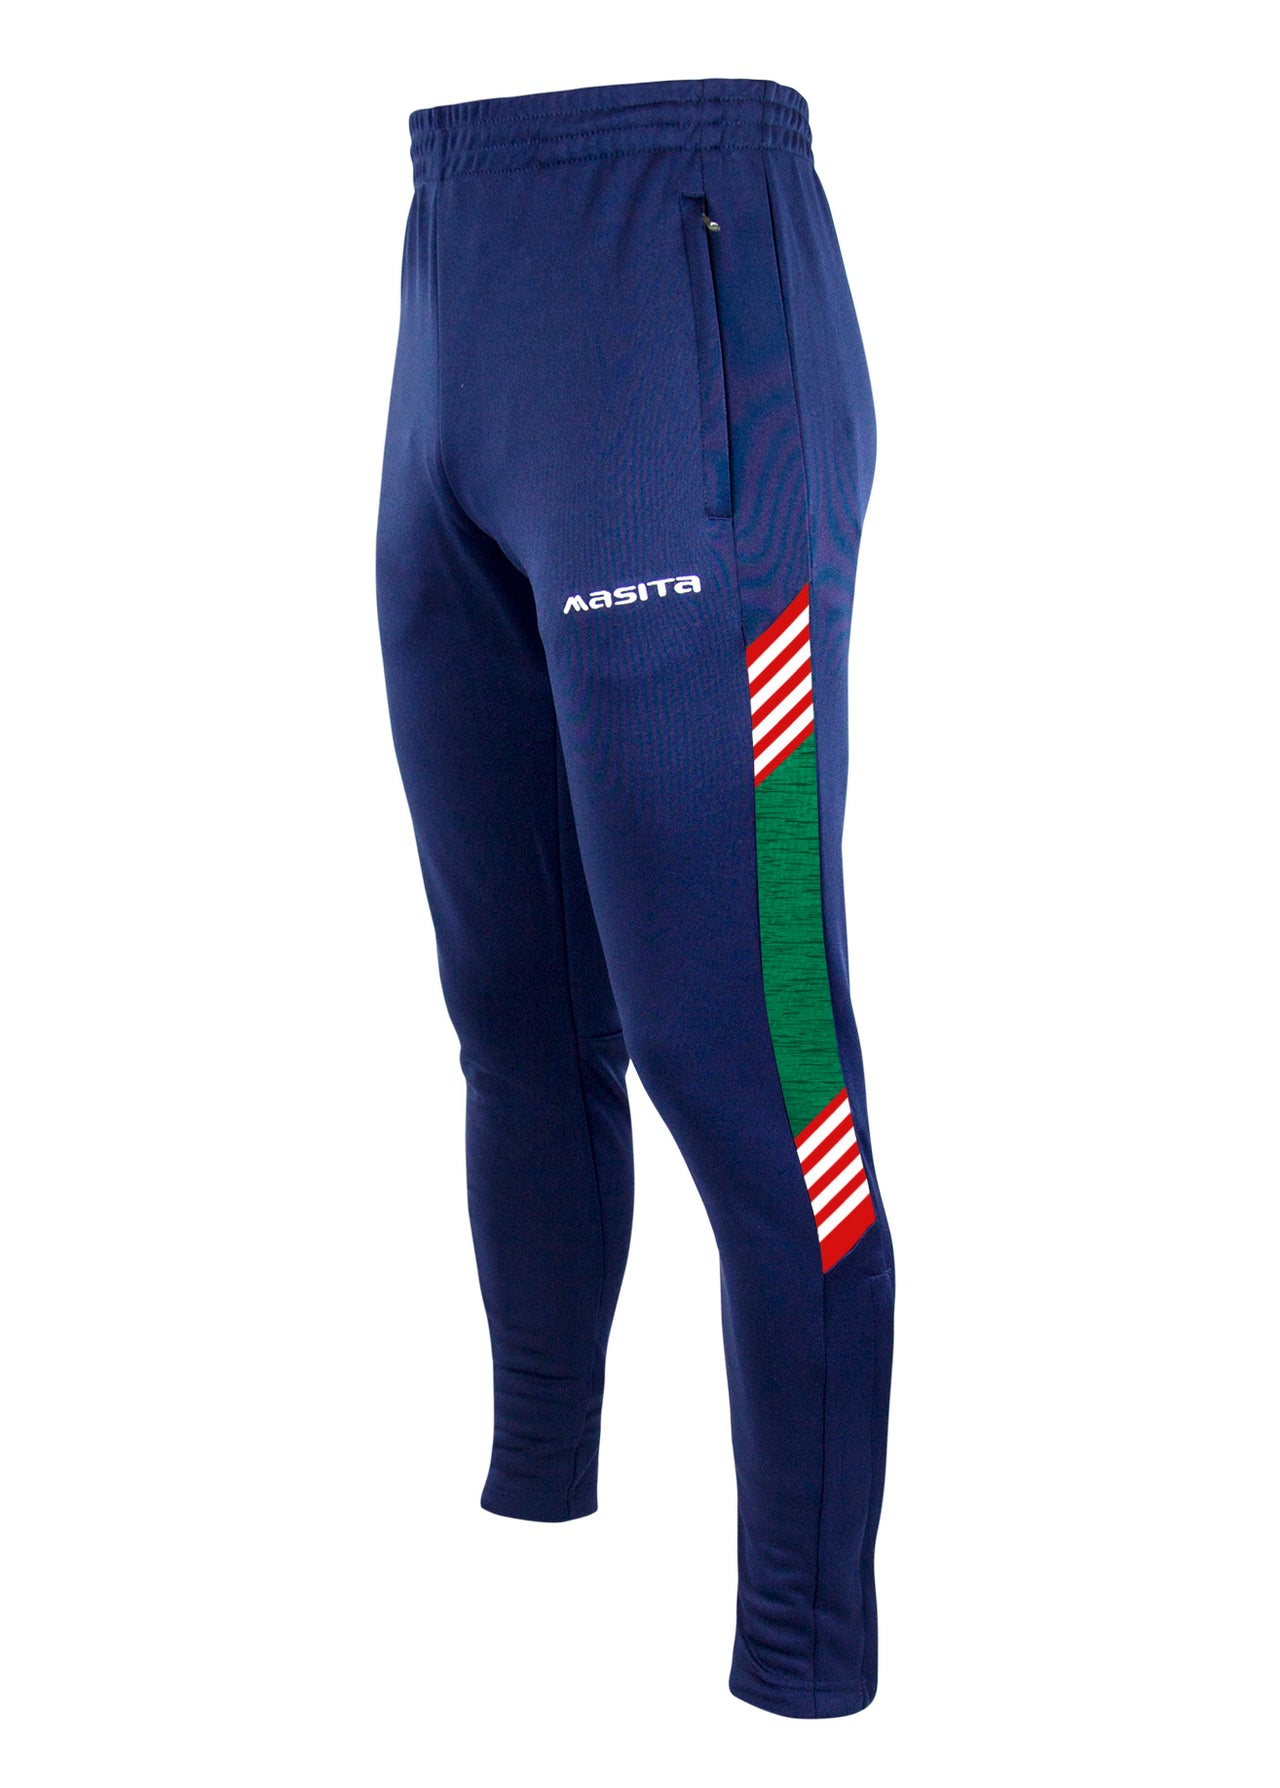 Hydro Skinny Bottoms Navy/Green/Red/White Adult